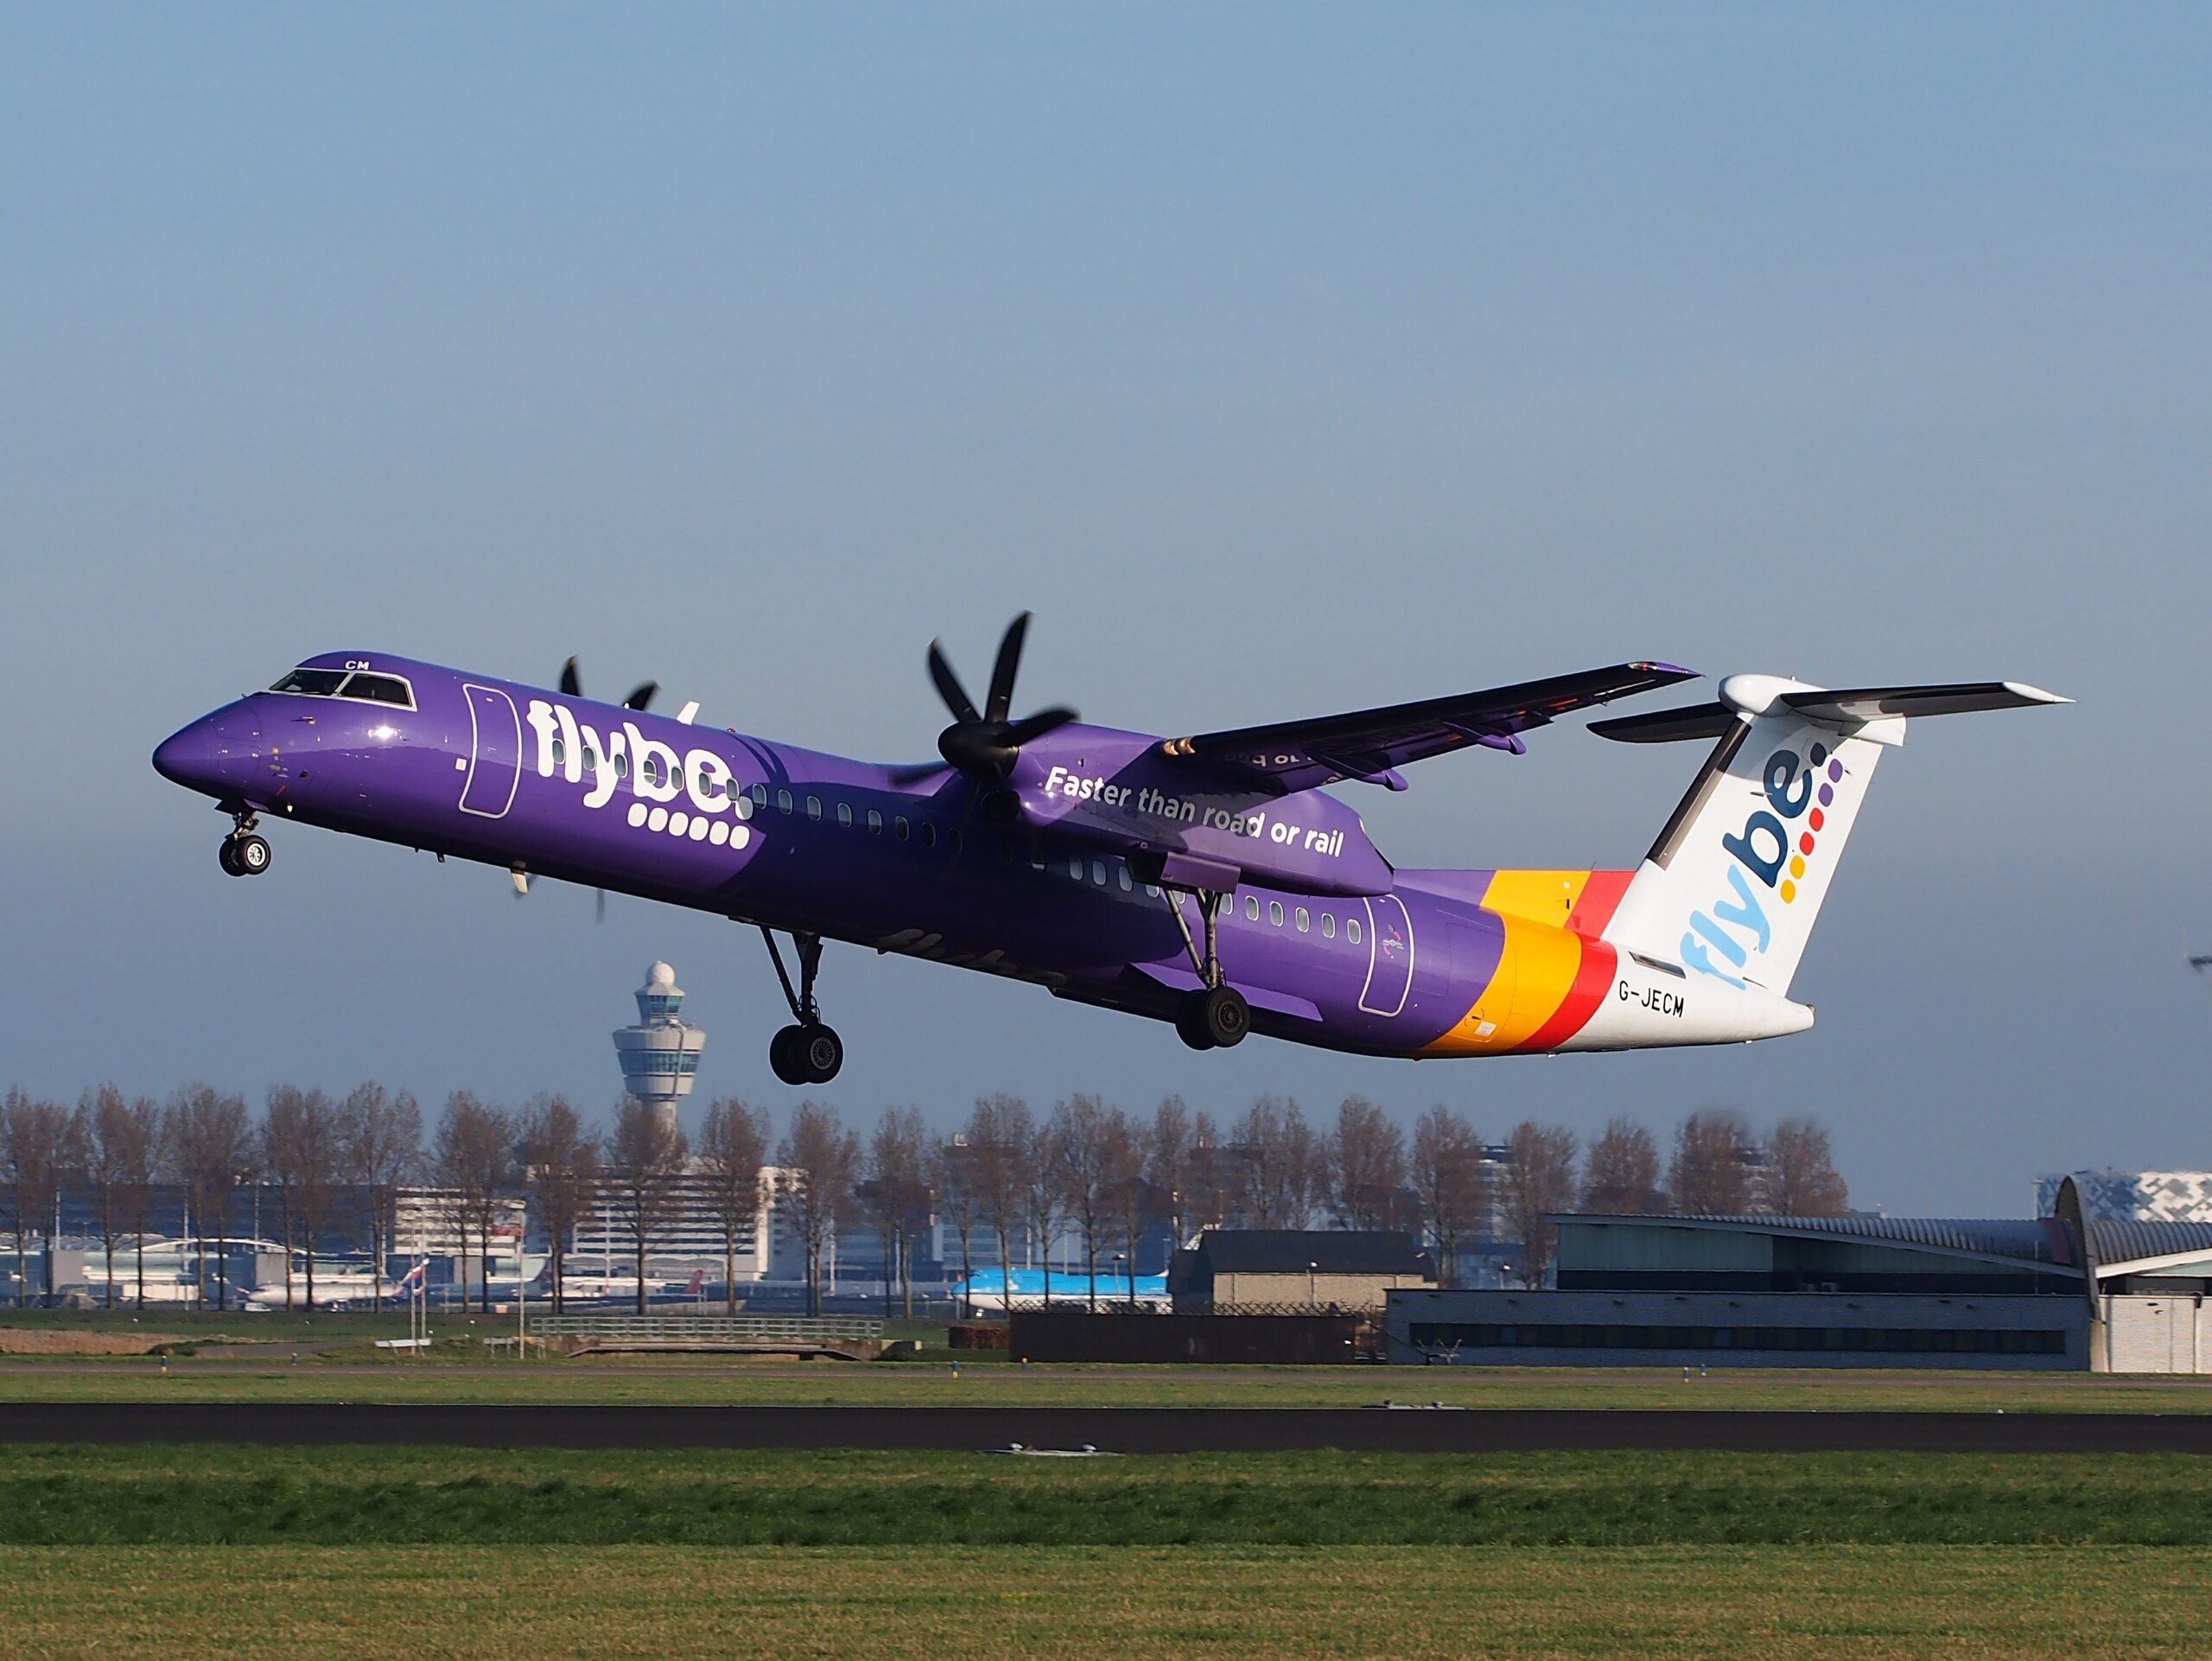 File:G-JECM Flybe De Havilland Canada DHC-8-402Q Dash 8 cn4118, Take off  from Schiphol (AMS - EHAM), The Netherlands pic2.JPG - Wikimedia Commons